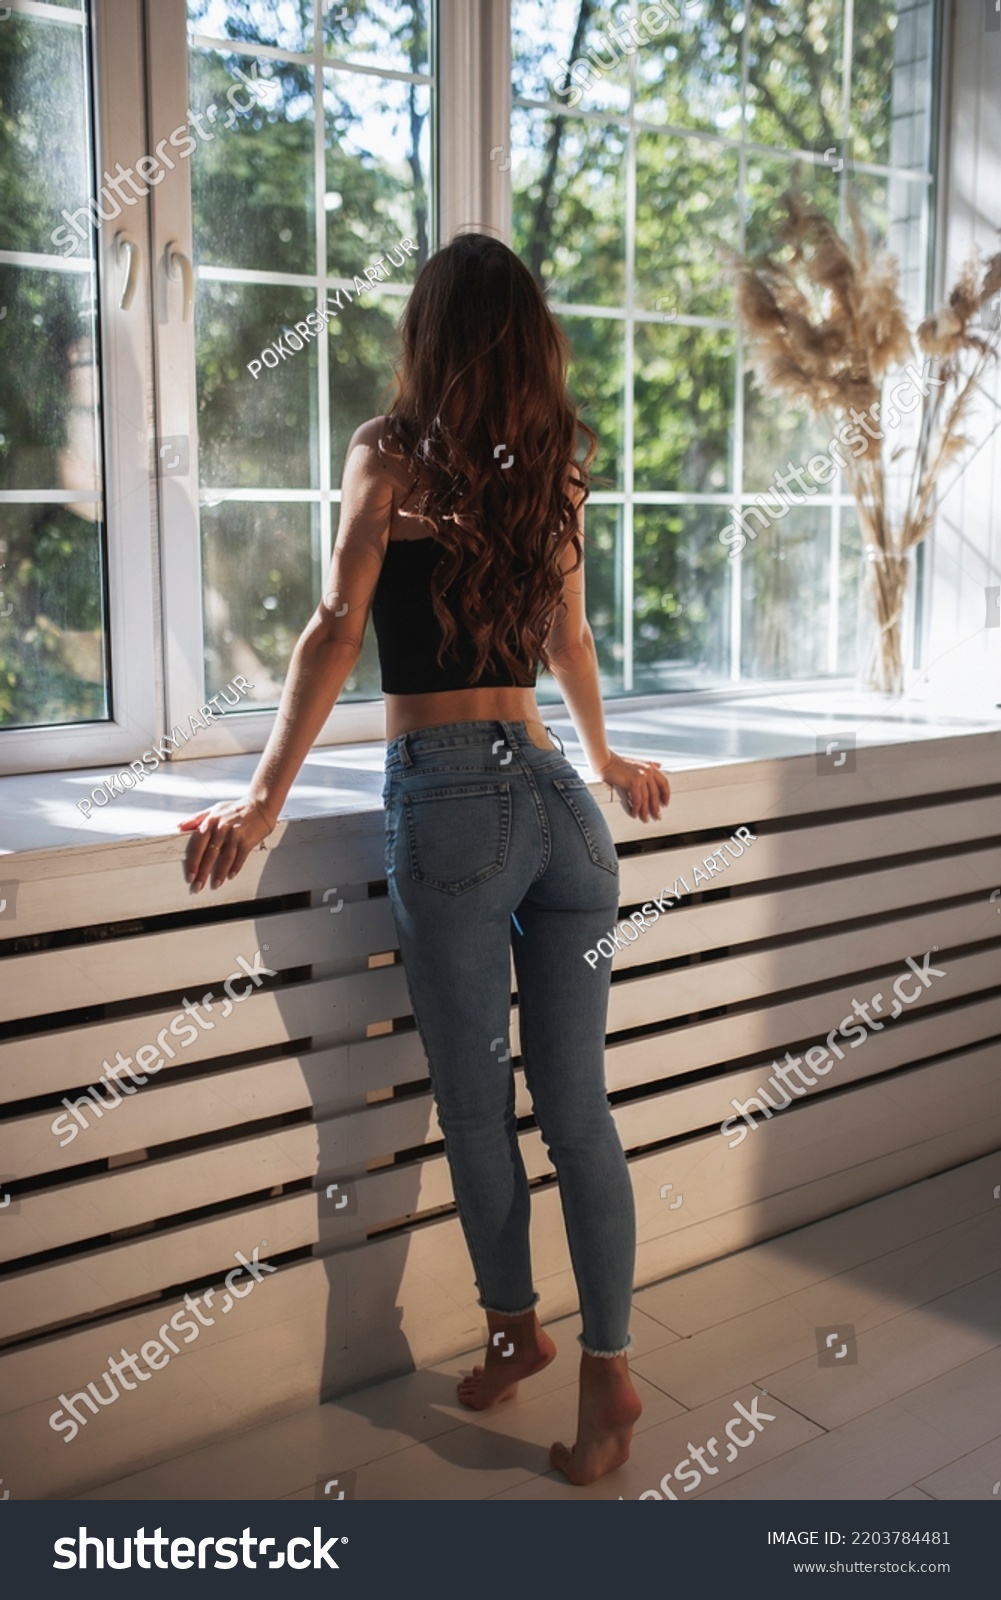 Girl in tight jeans look out the window
 #2203784481